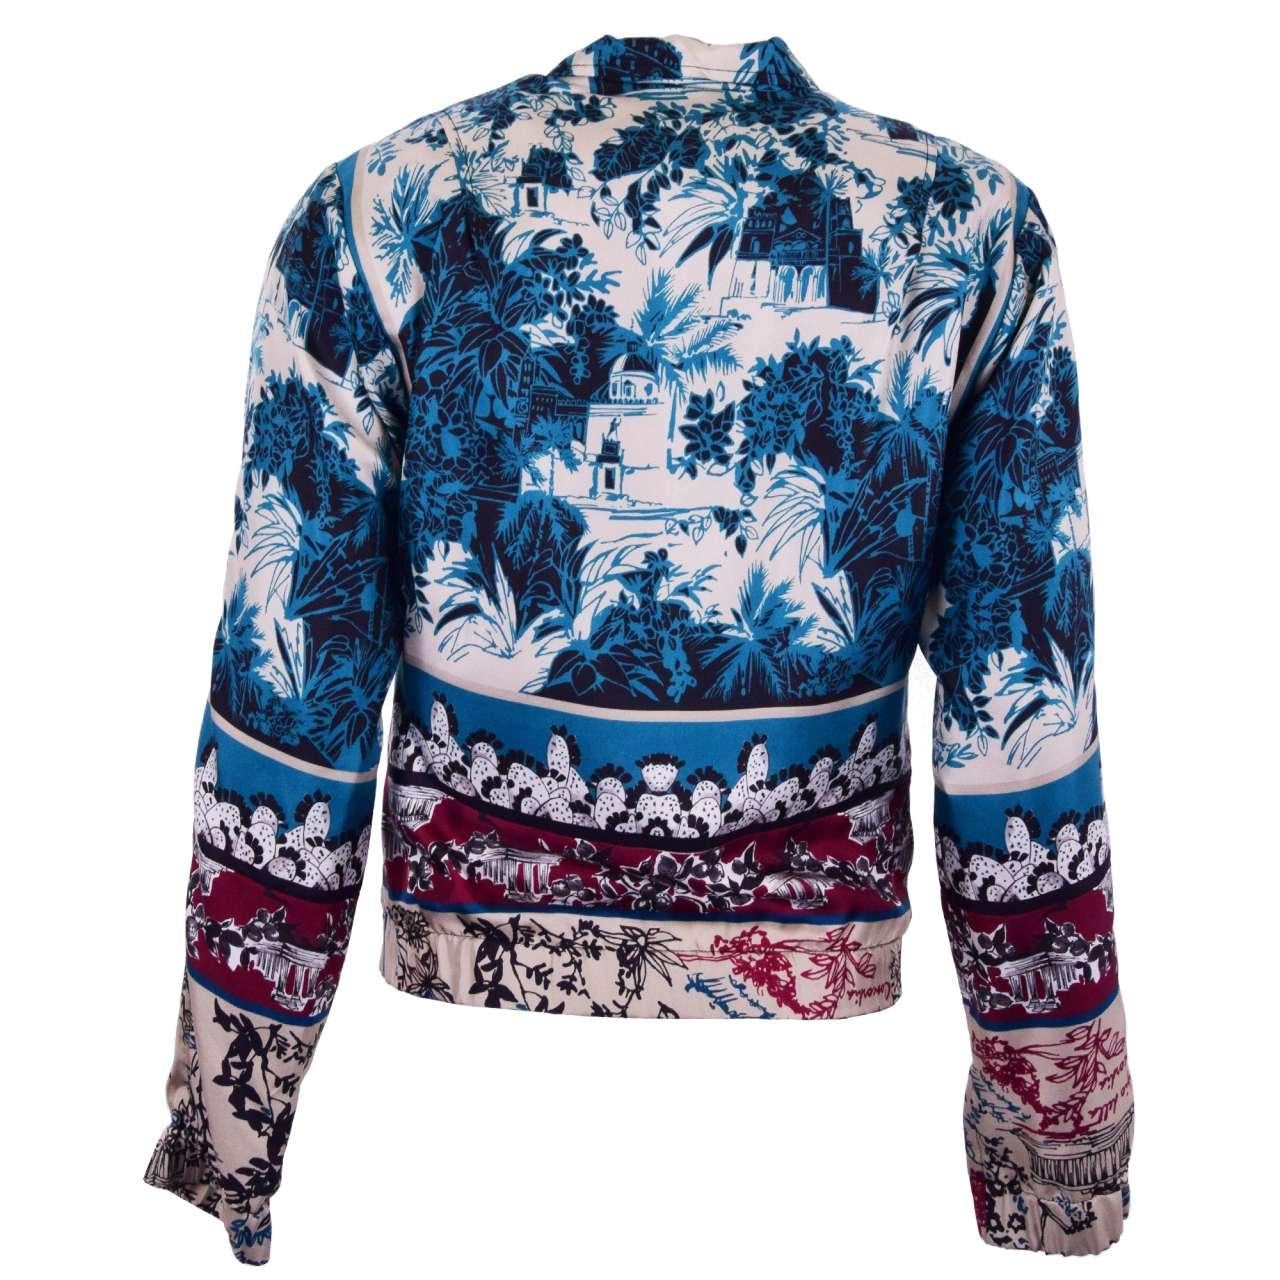 - Majolica printed Silk Jacket by DOLCE & GABBANA - New with tag - MADE IN ITALY - Former RRP: EUR 1.500 - Model: G9X49T-G9P53-S9000 - Material: 100% Silk - Lining: 51% Acetat, 49% Viscosa - Main Color: Blue - Zip closure - Slim Fit - Two pockets